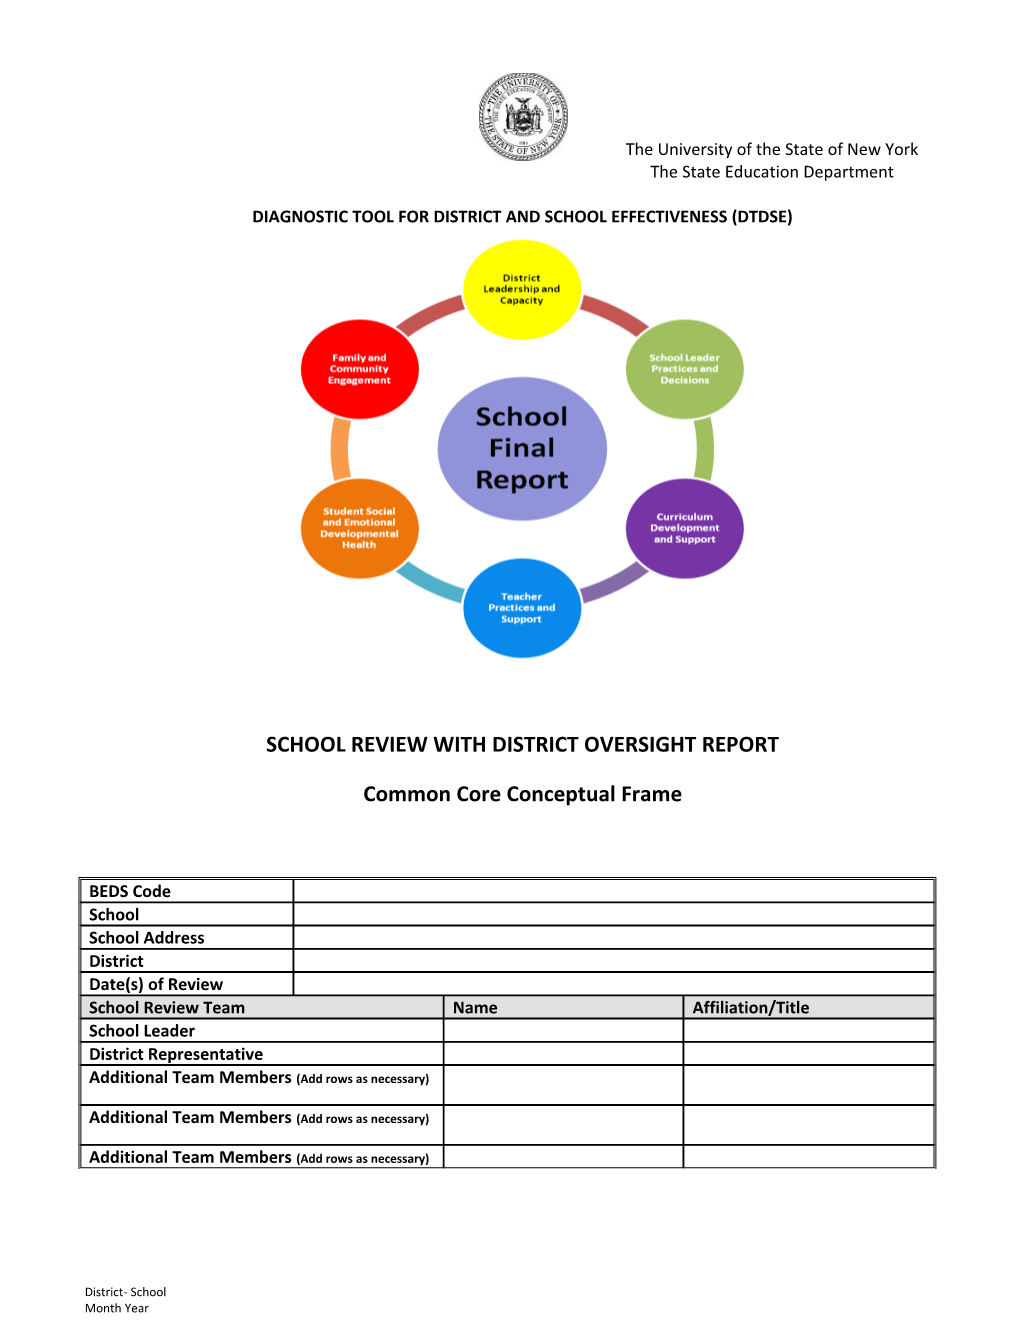 Diagnostic Tool for District and School Effectiveness (Dtdse)